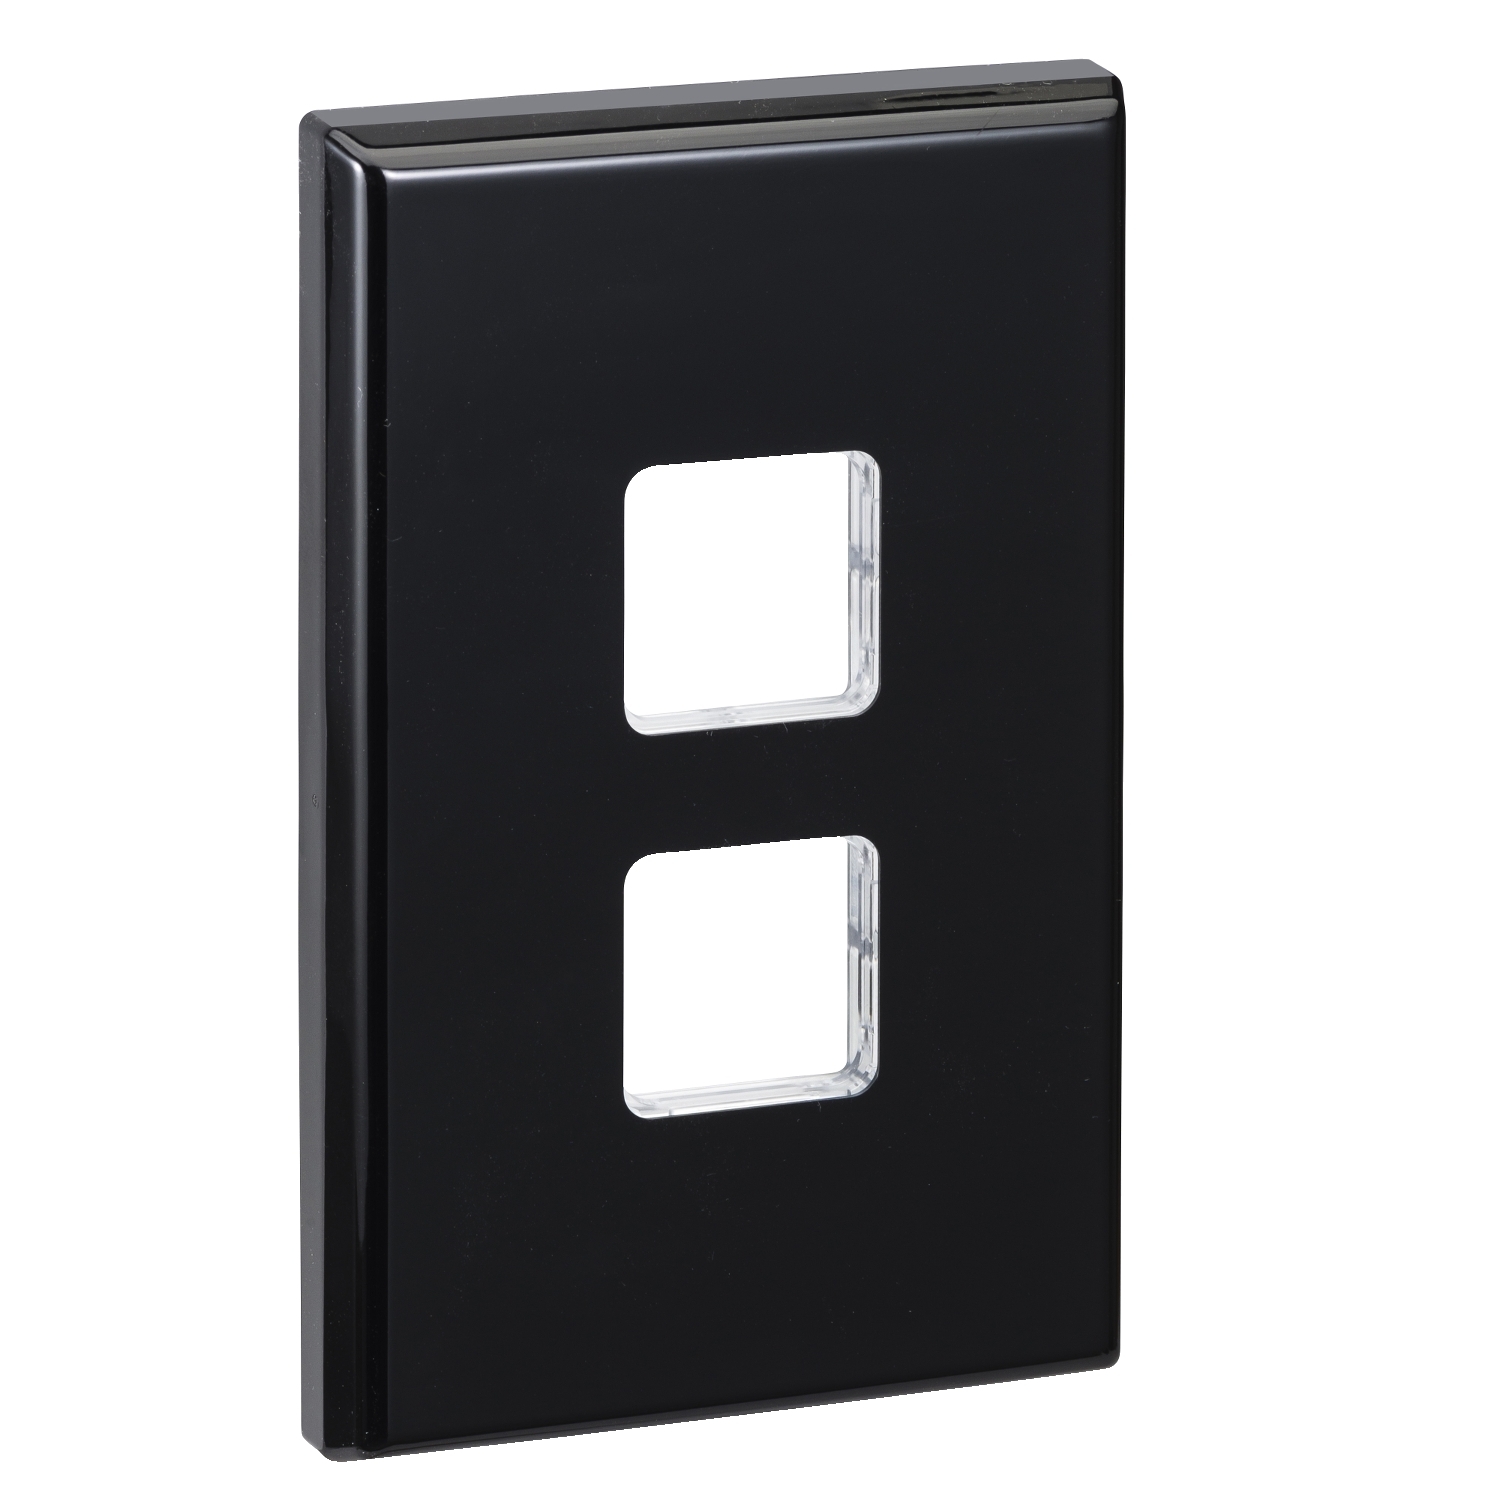 PDL 600 Series - Grid + Cover Plate Switch 2-Gang - Black